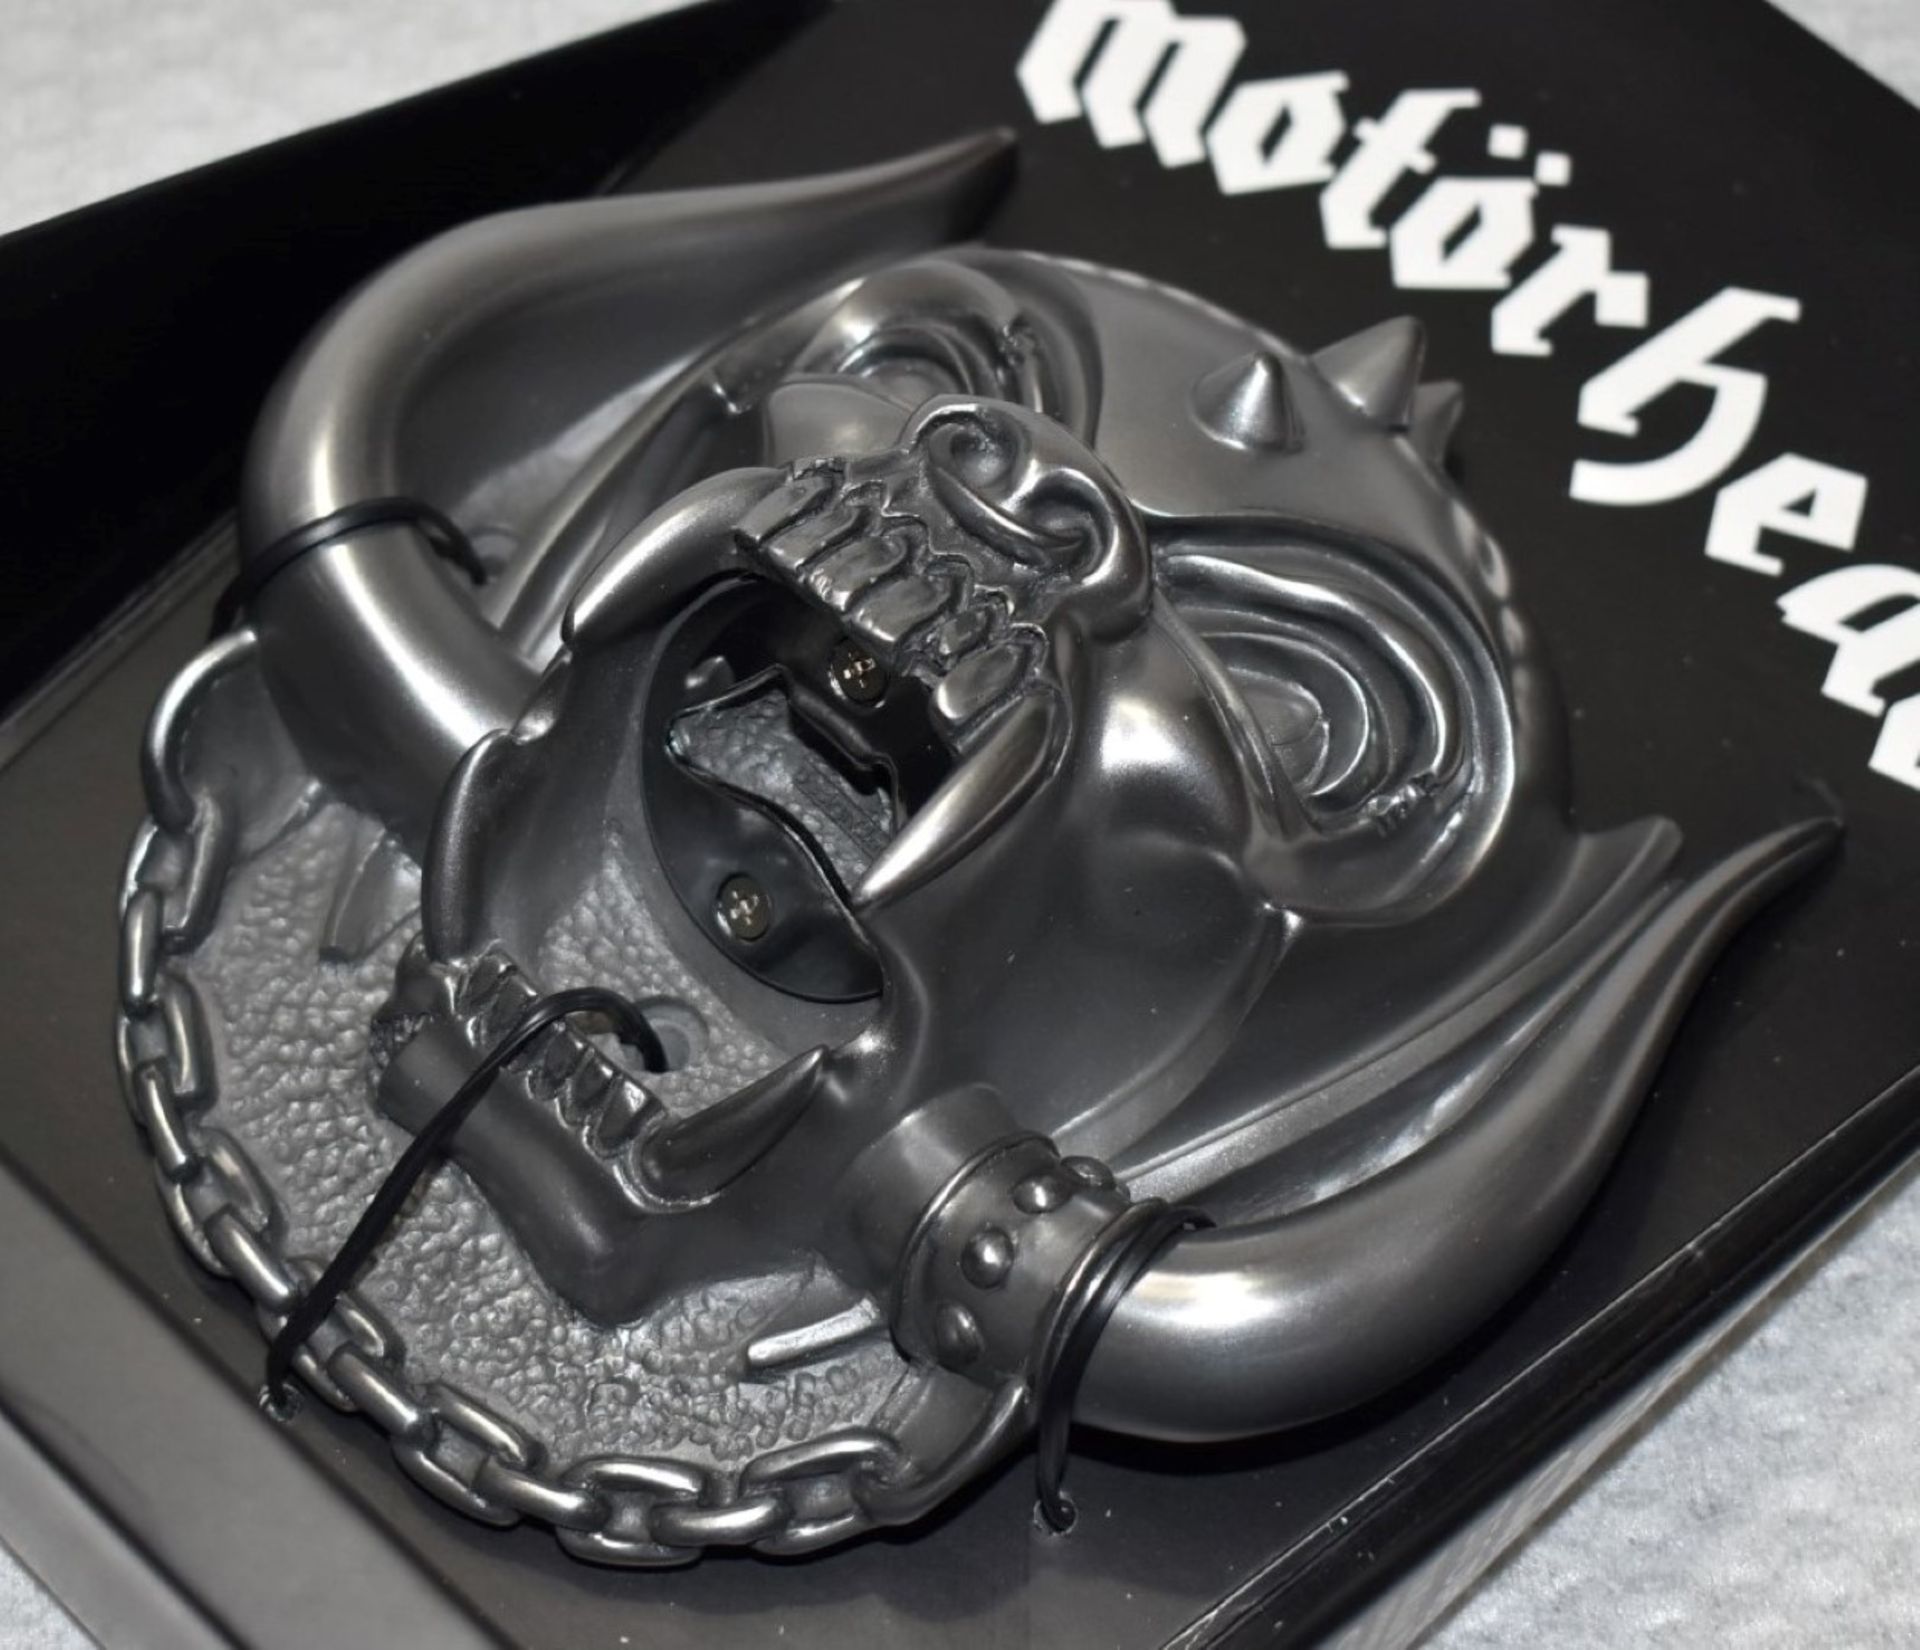 1 x Motorhead Wall Mounted Bottle Opener - Snaggletooth With a Gun Metal Finish - By Beer Buddies - - Image 12 of 12